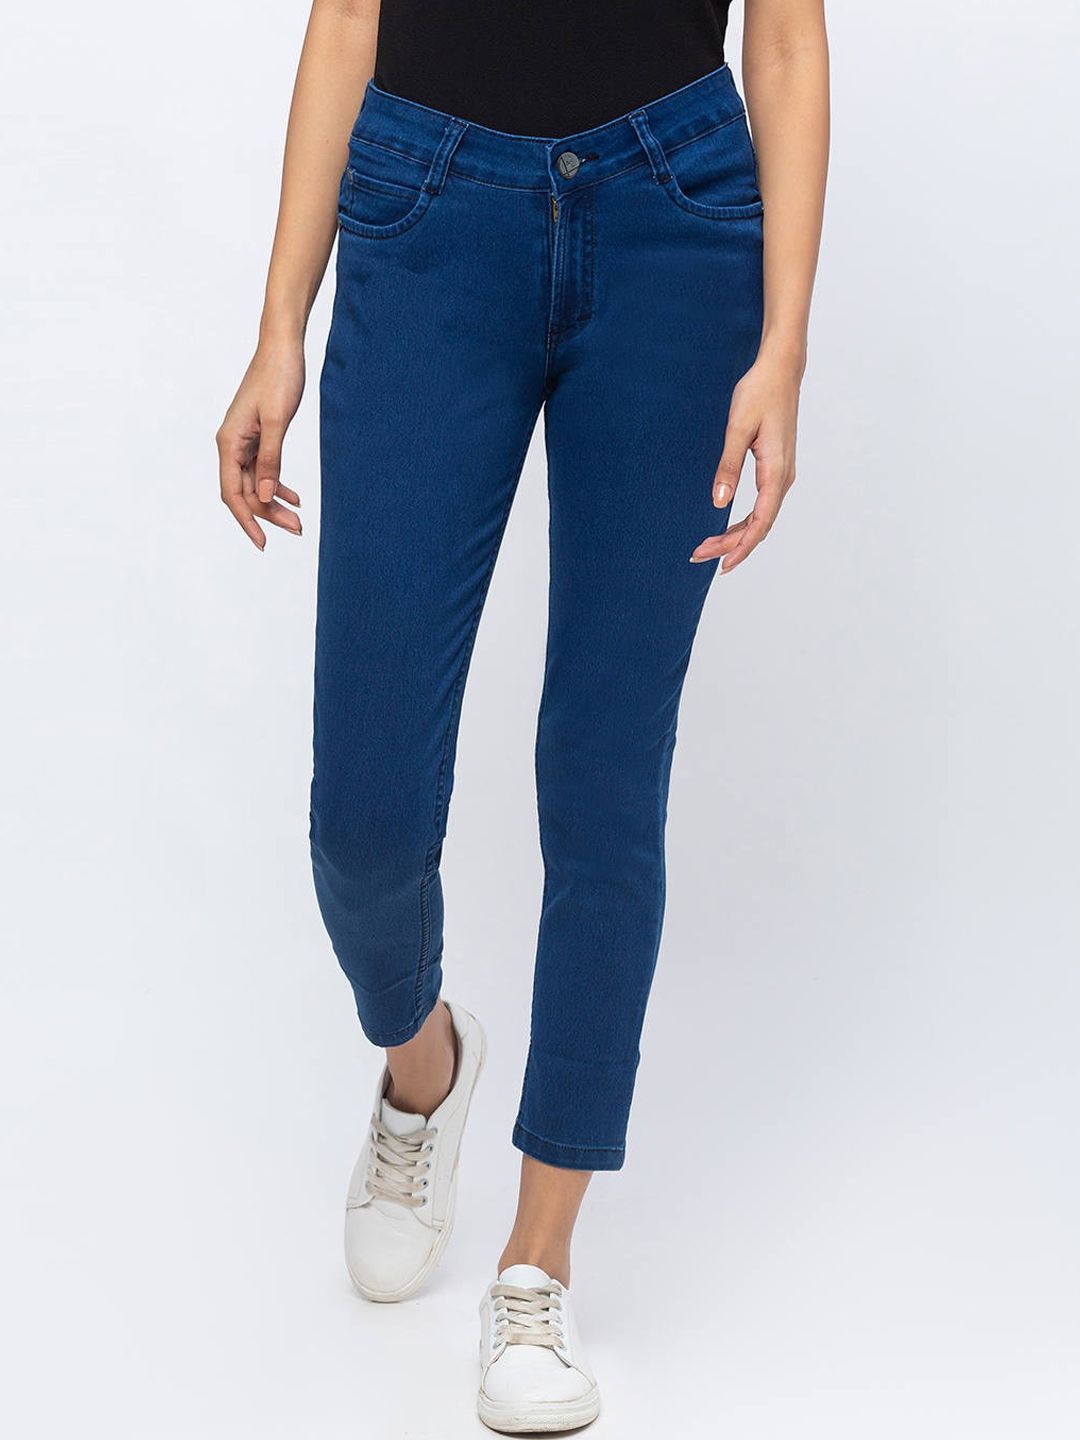 ZOLA Dx Women Blue Slim Fit Mid Waist Ankle Length Jeans Price in India